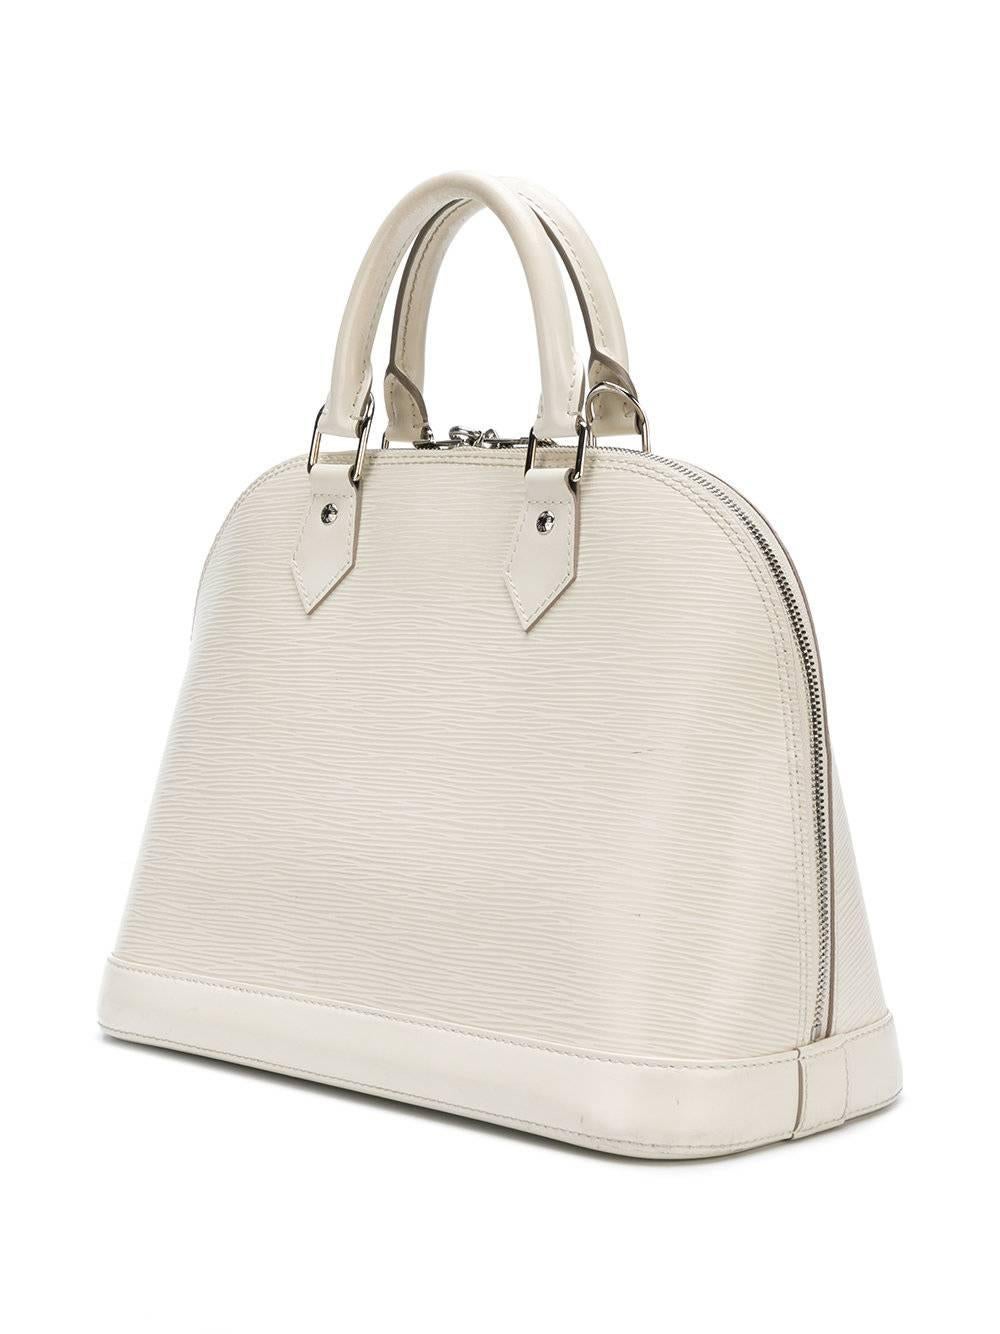 This off-white coloured 'Alma' bag from Louis Vuitton is a modern, yet timeless classic, featuring epi-textured leather, a zip closure, lock with key accented by silver-toned hardware, a beige fabric lining and two small interior slip pockets for